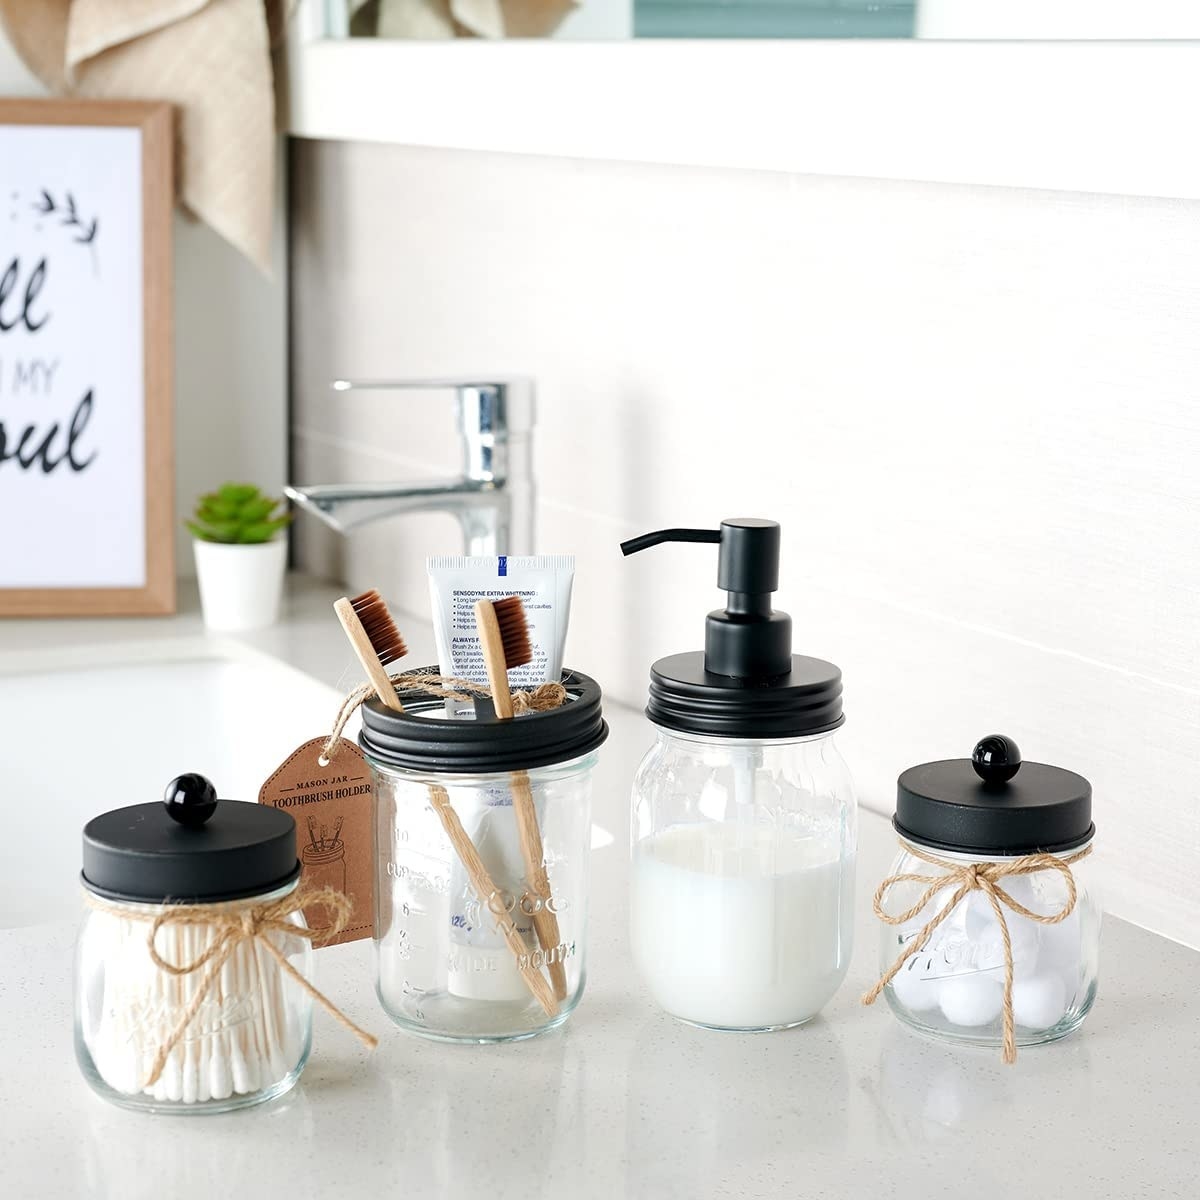 The four mason jars with black tops. One has a soap dispenser, another is holding two tooth brushes, and two smaller jars have easy-to-lift tops filled with cotton balls and swabs